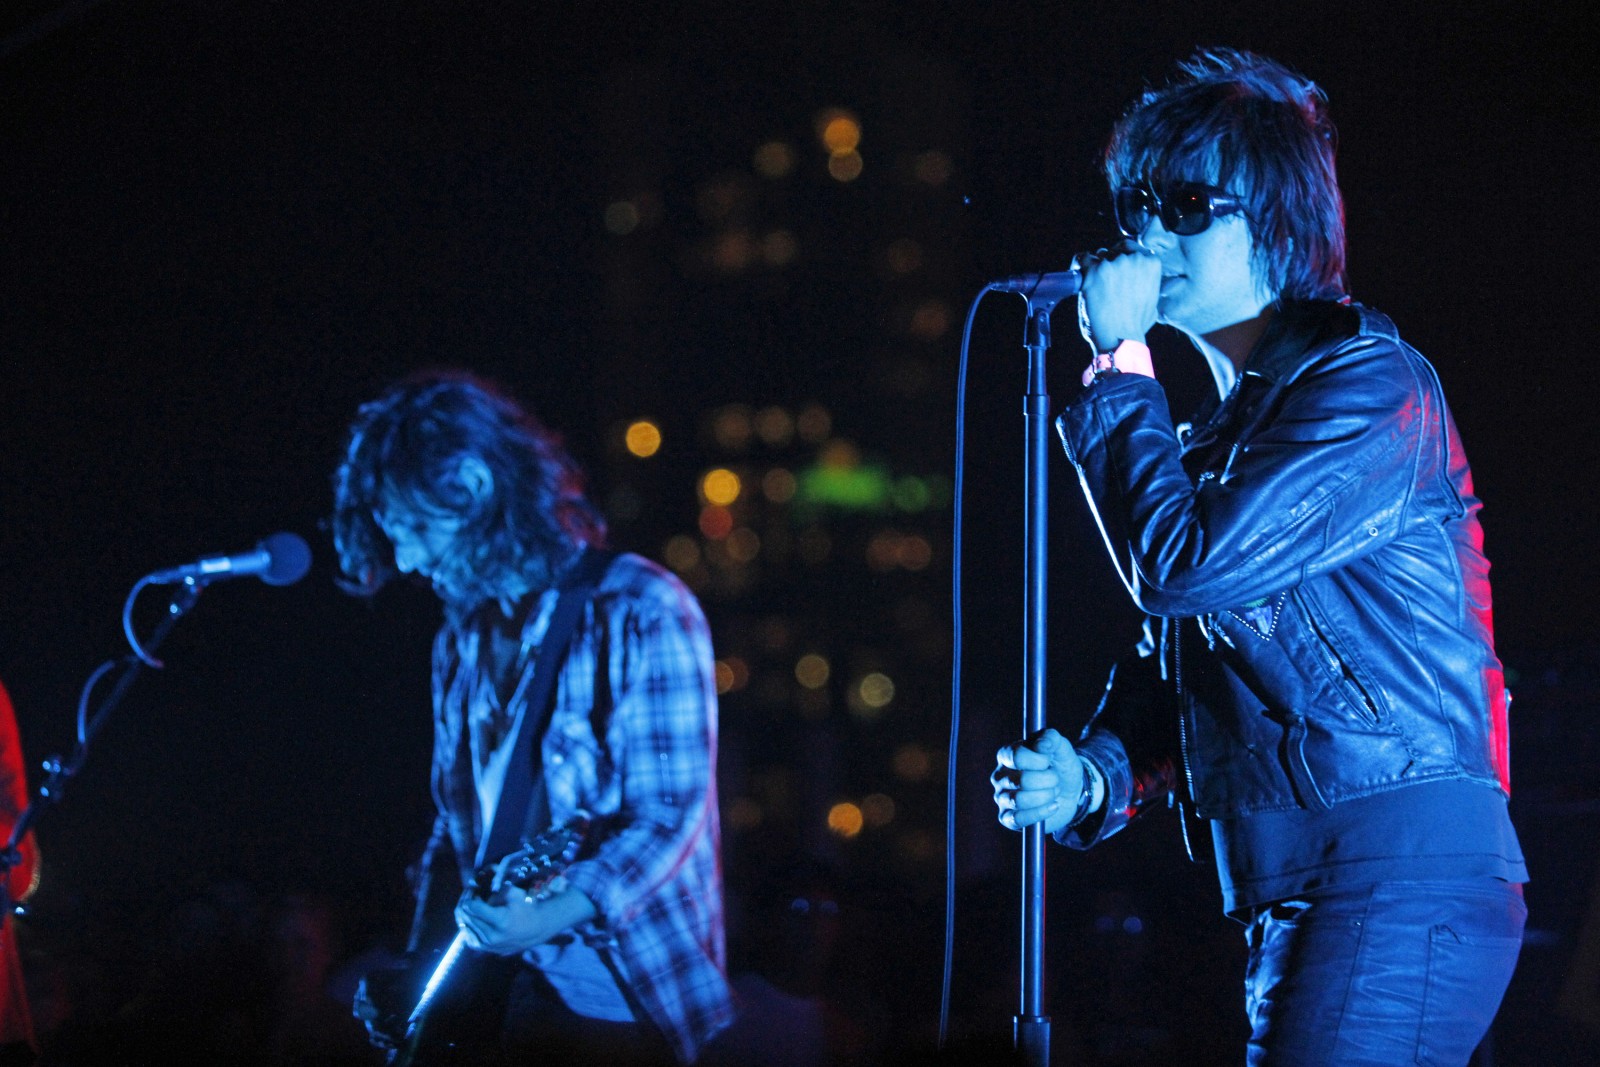 Julian Casablancas and The Strokes perform at the SXSW Music Festival late Thursday, March 17, 2011 in Austin, Texas.(AP Photo/Jack Plunkett)